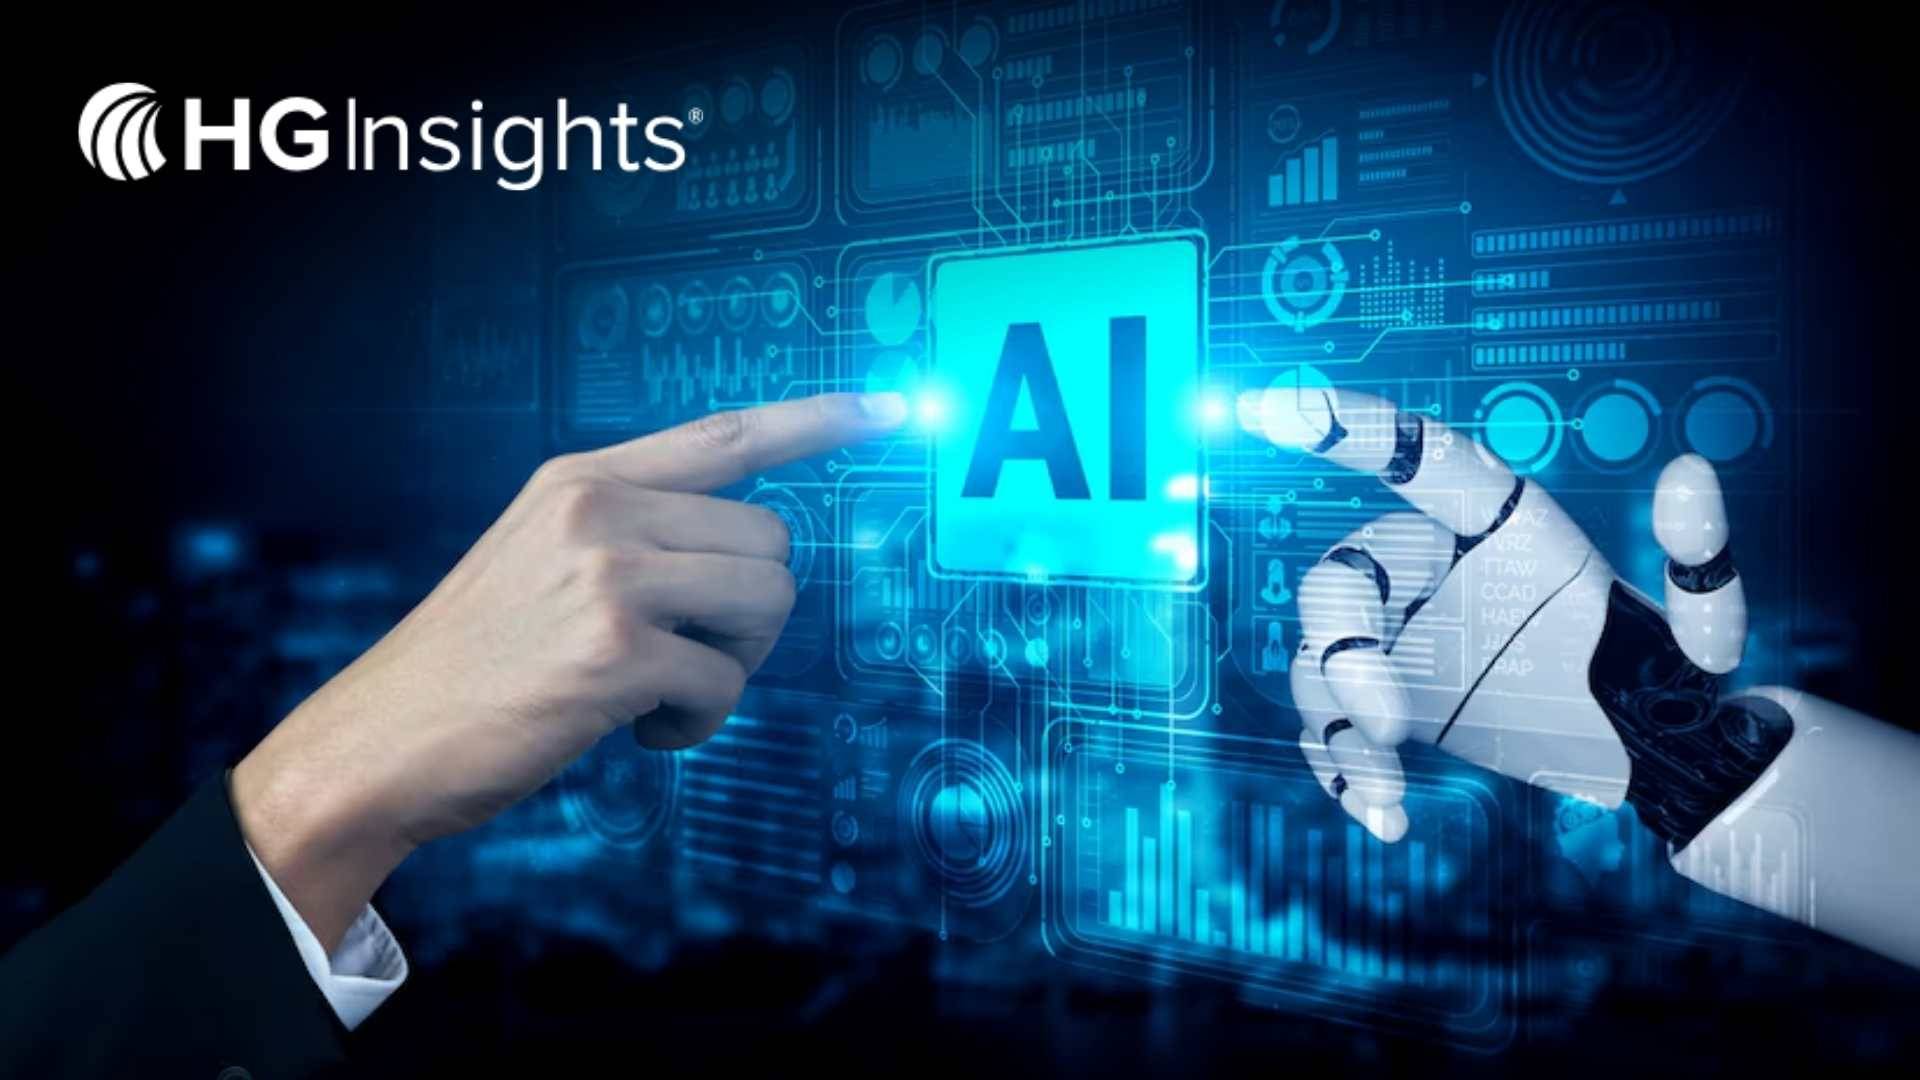 HG Insights Unveils AI Partner 100 to Guide Strategic AI Partnerships